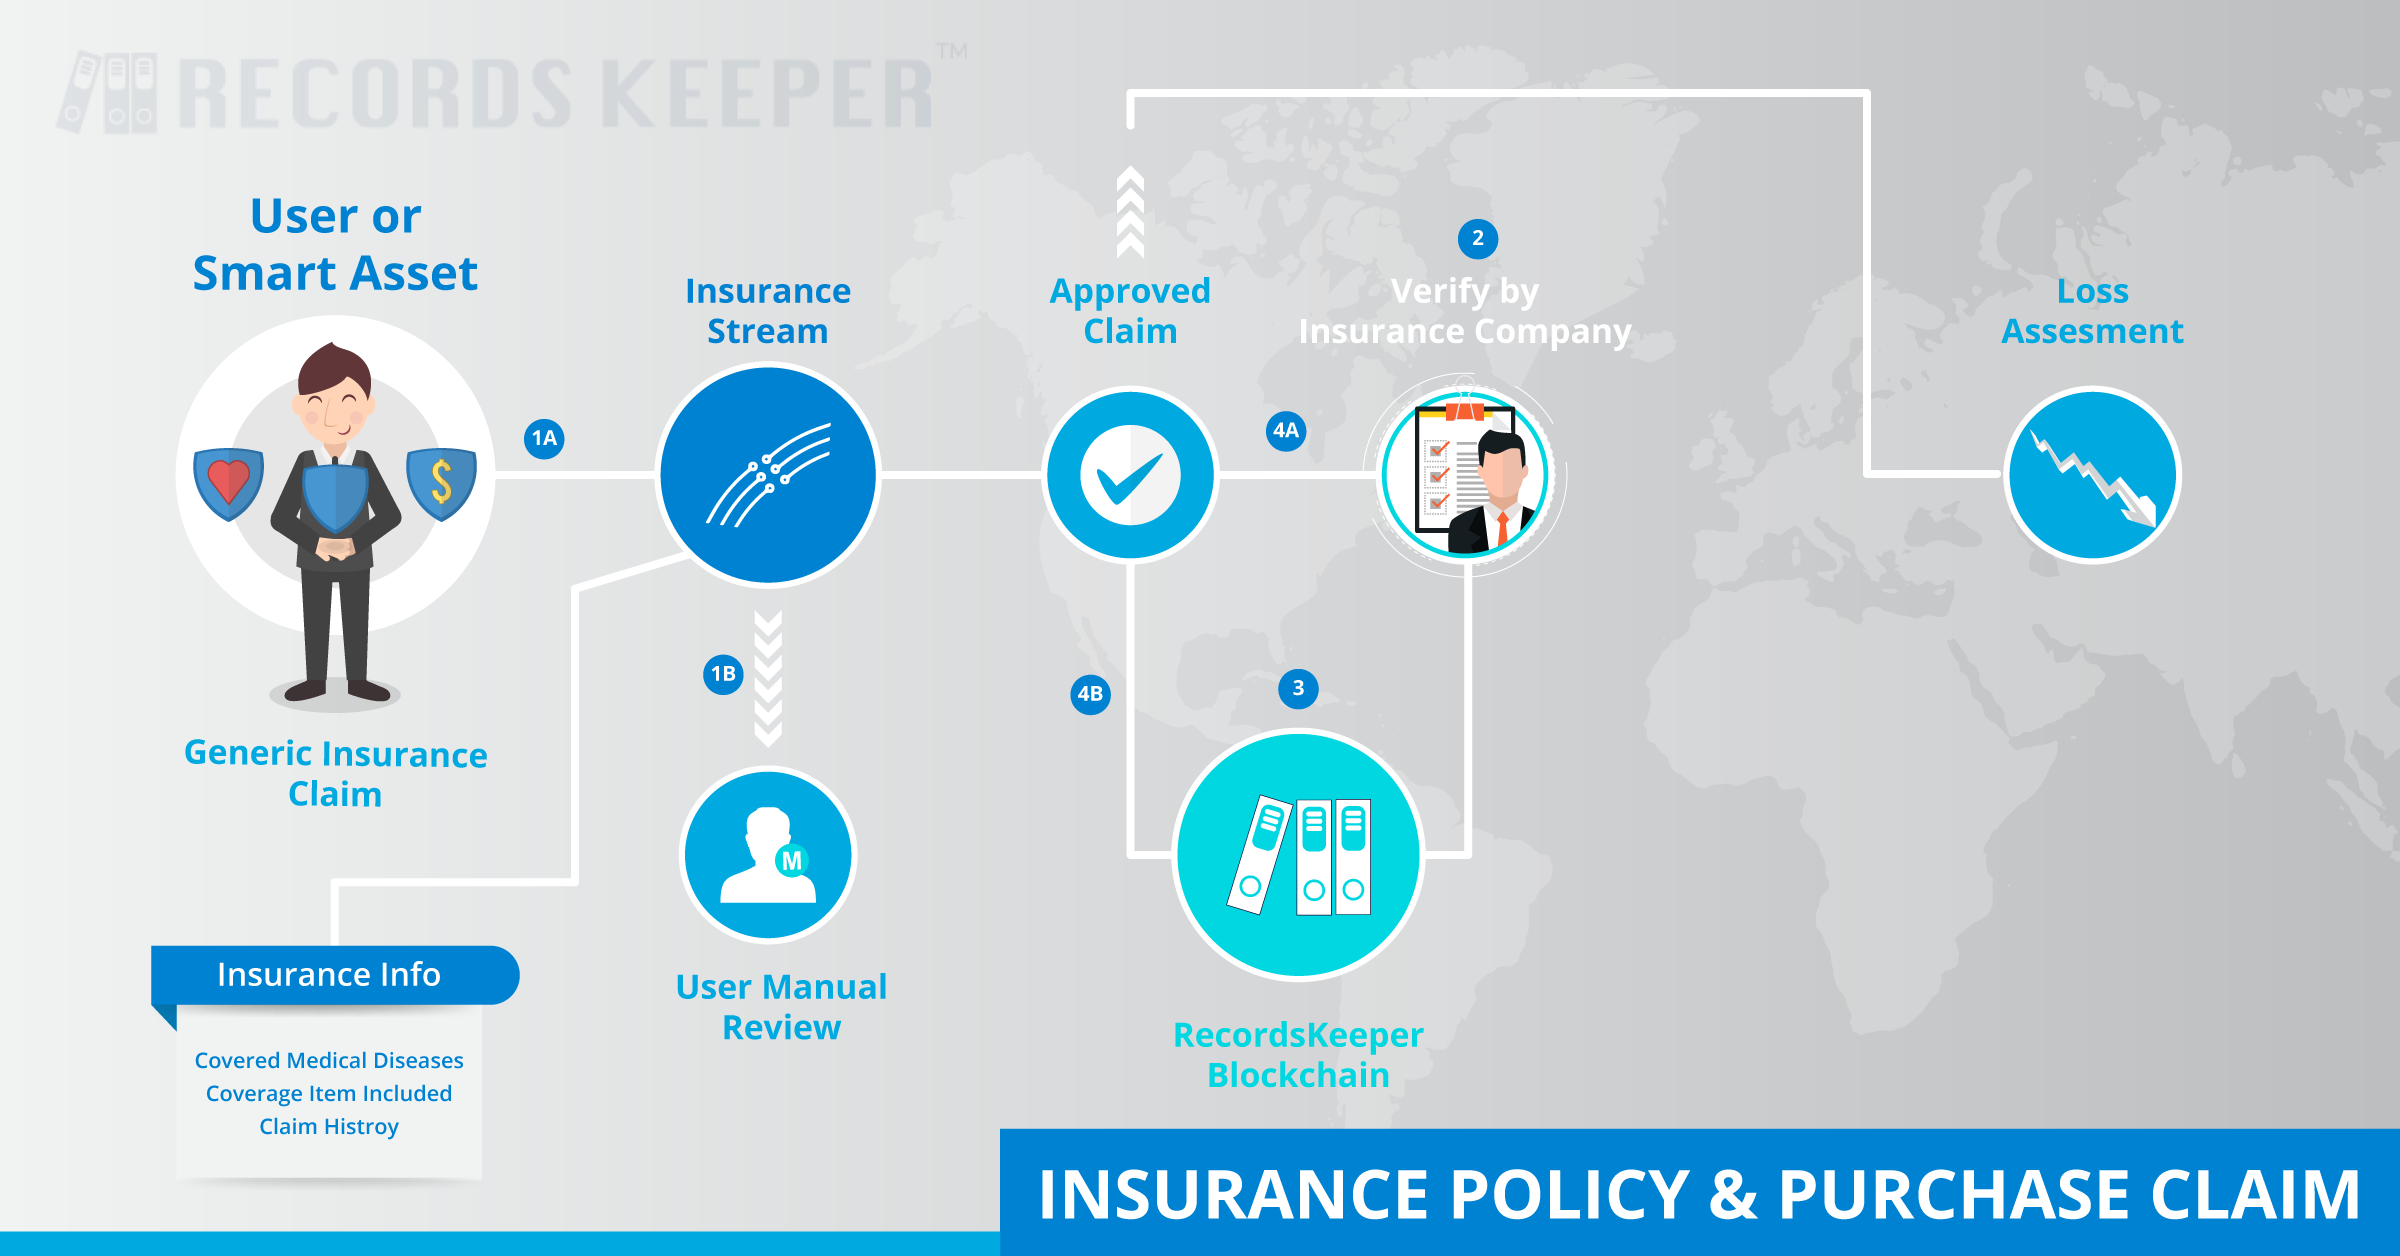 _images/Insurance-Policy-&-Purchase-Claim.png